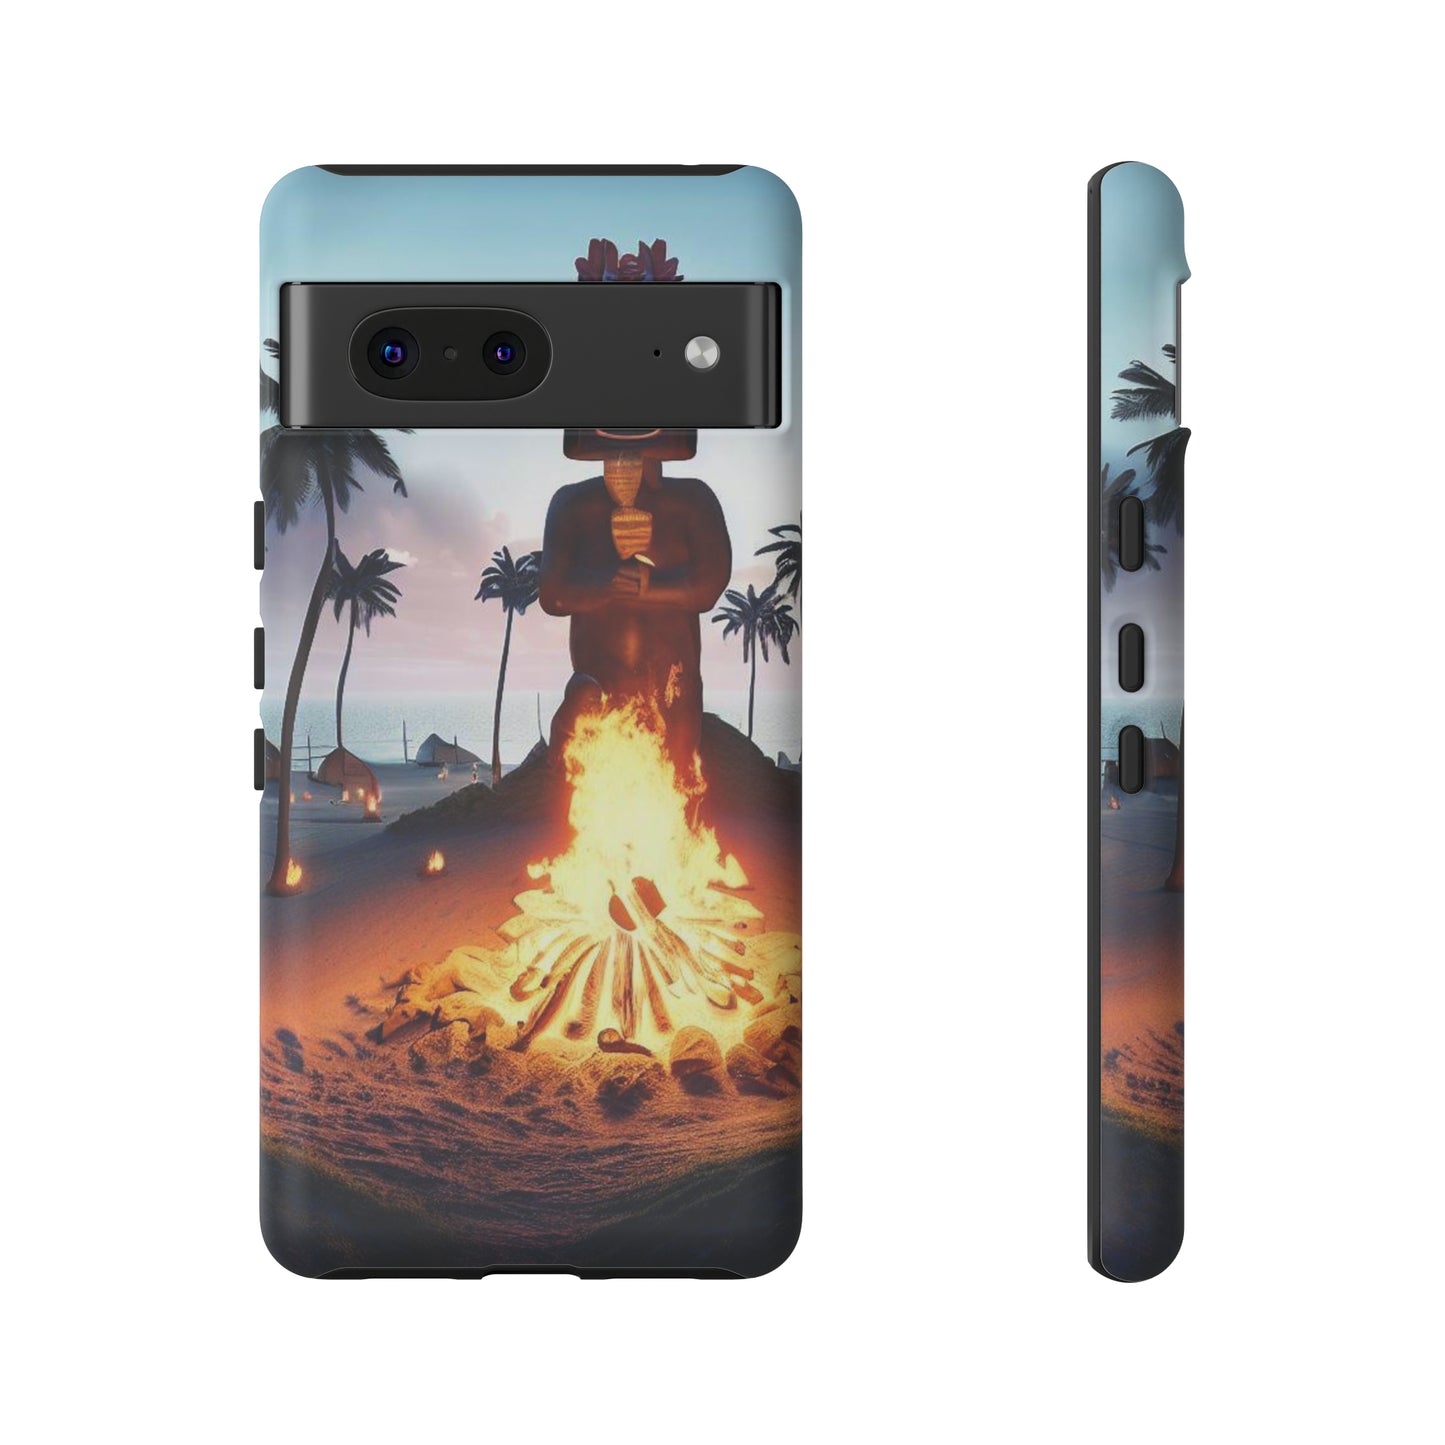 Tough Tiki Phone Case for Android and Iphone